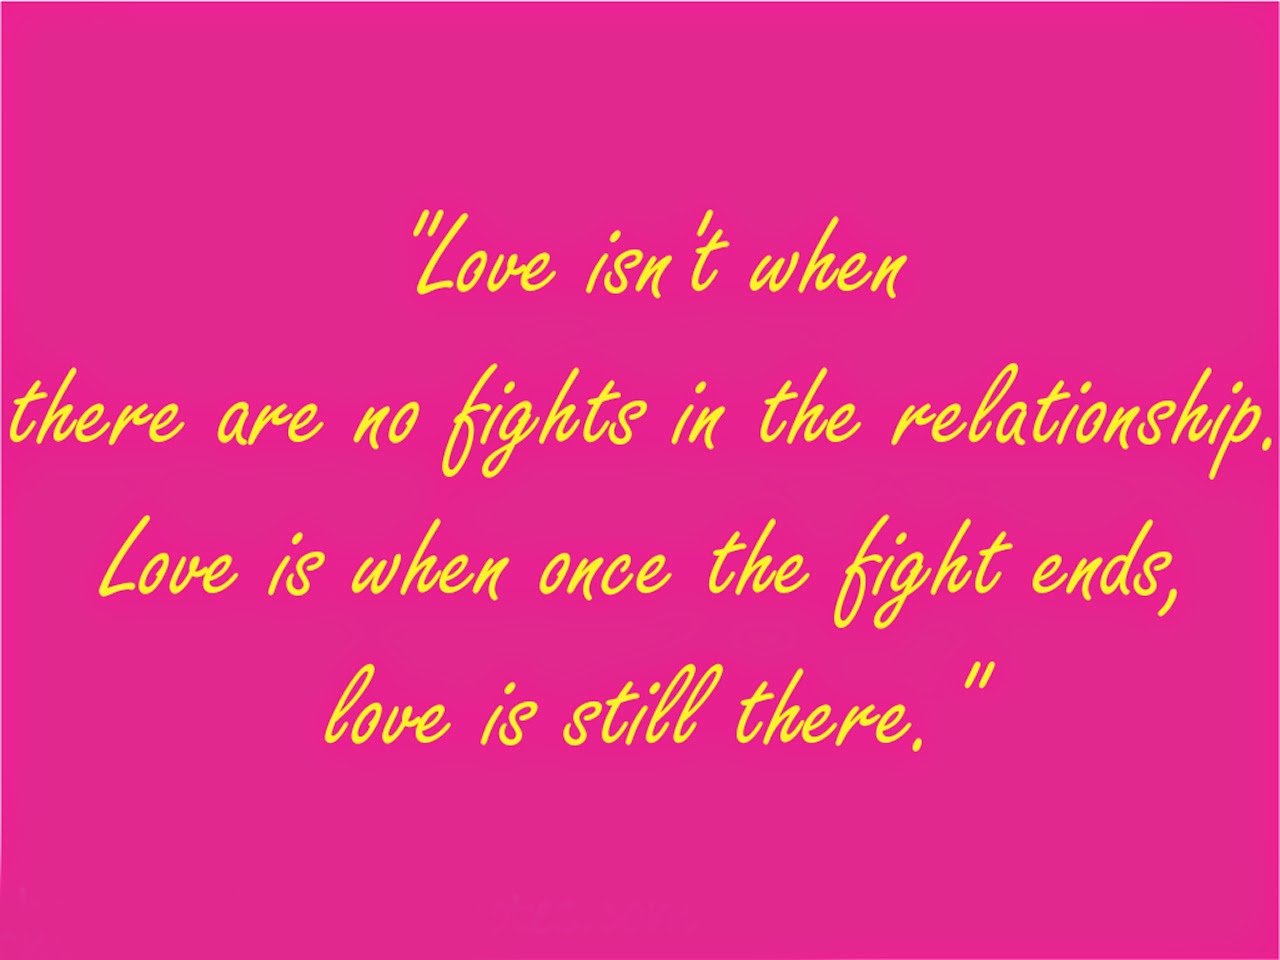 "Love is not when there are no fights in the relationship